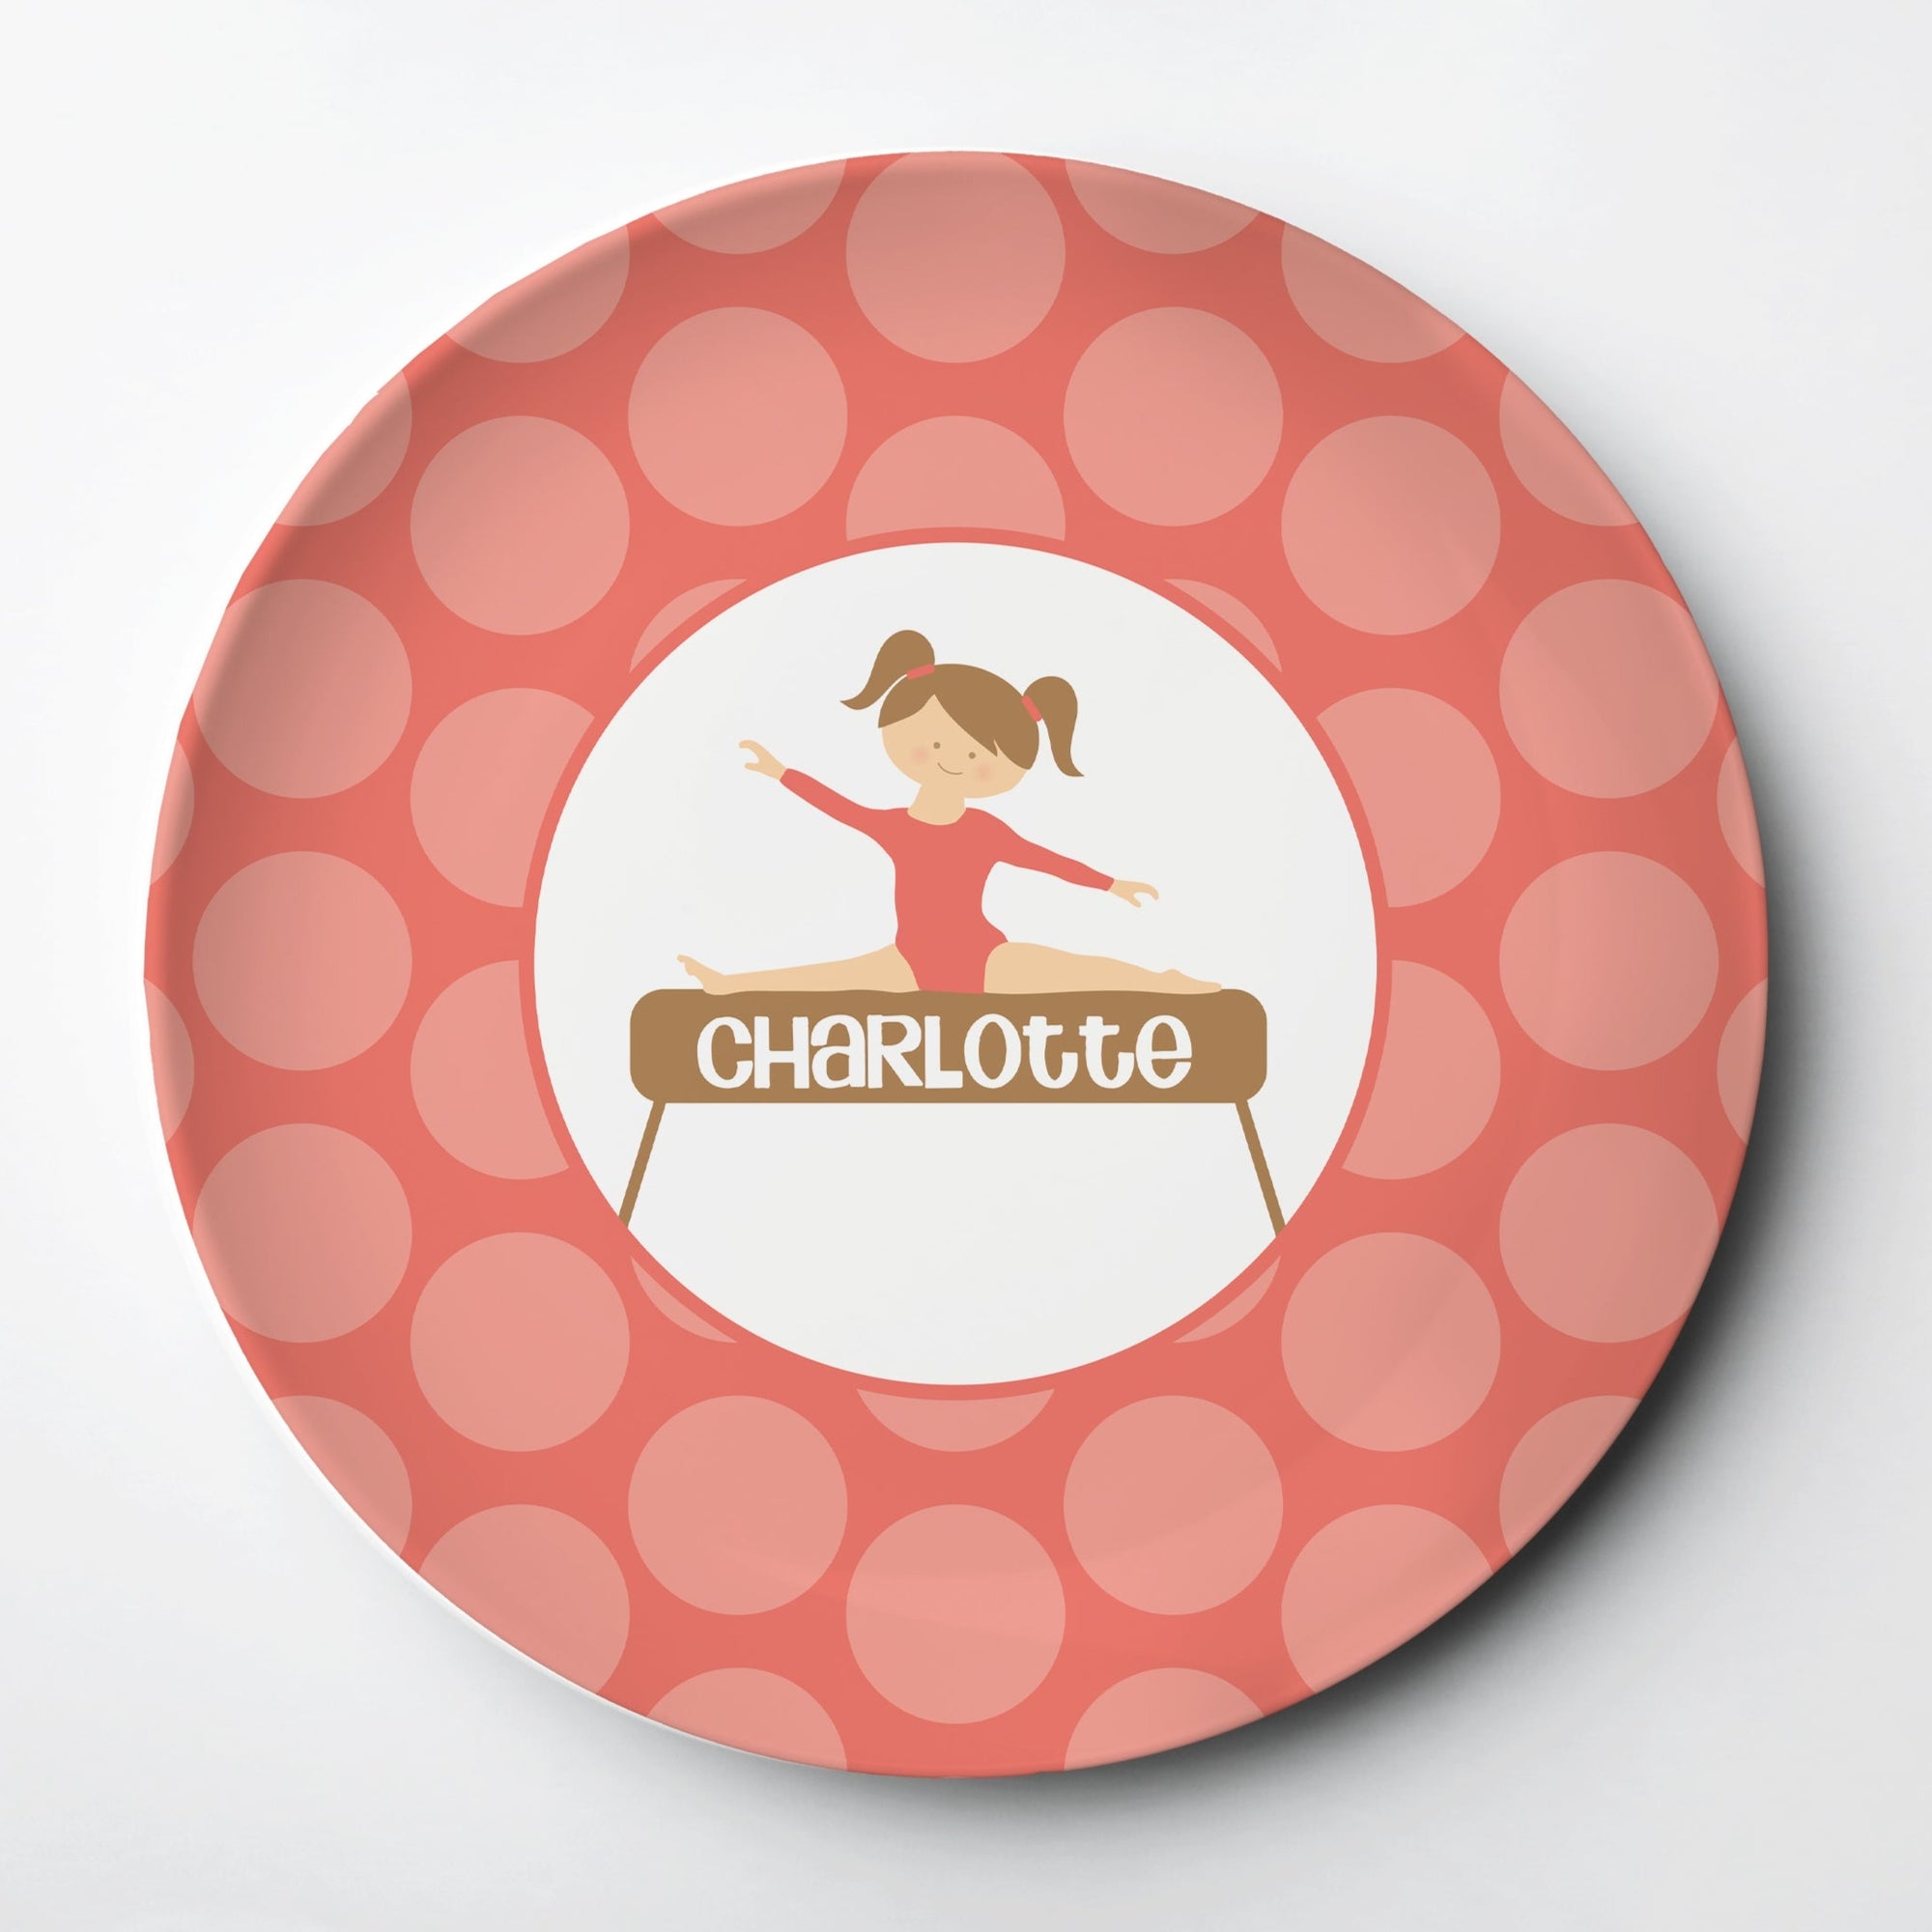 Gymnastic lovers personalized ThermoSāf® plate, dishwasher safe, Pipsy.com